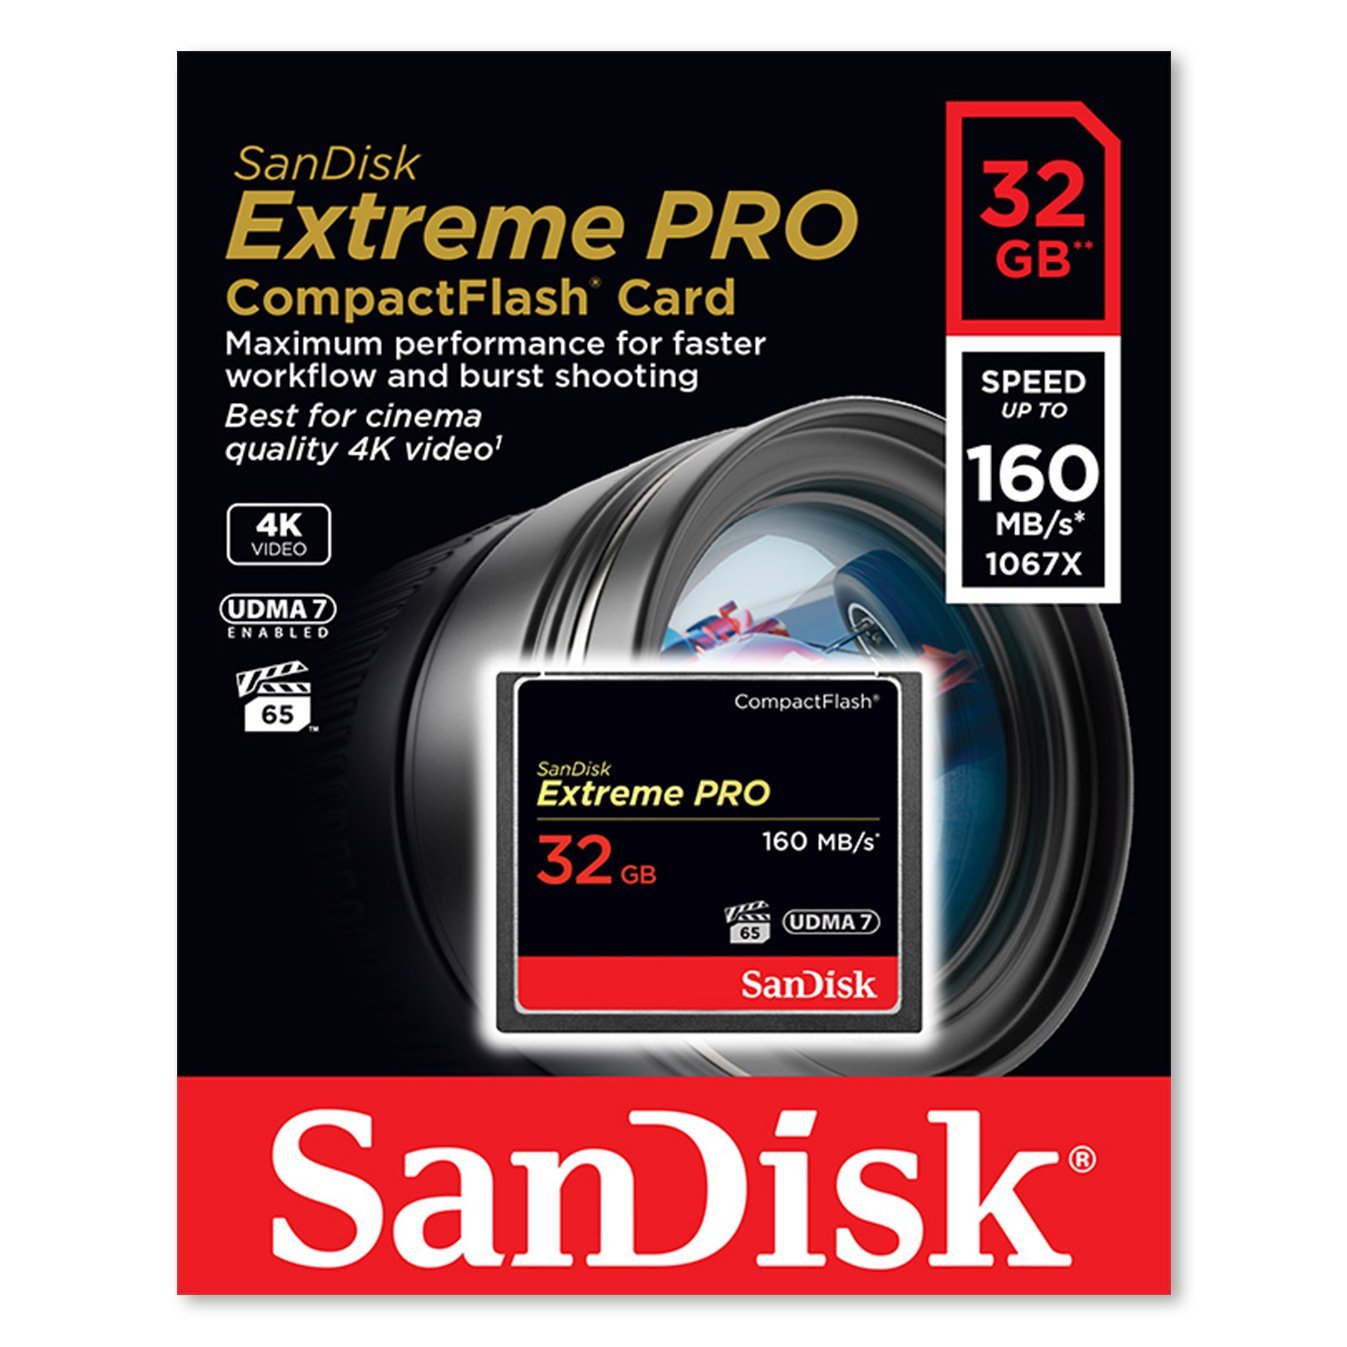 SanDisk Extreme PRO CompactFlash Memory Card – Weikeng Technology 